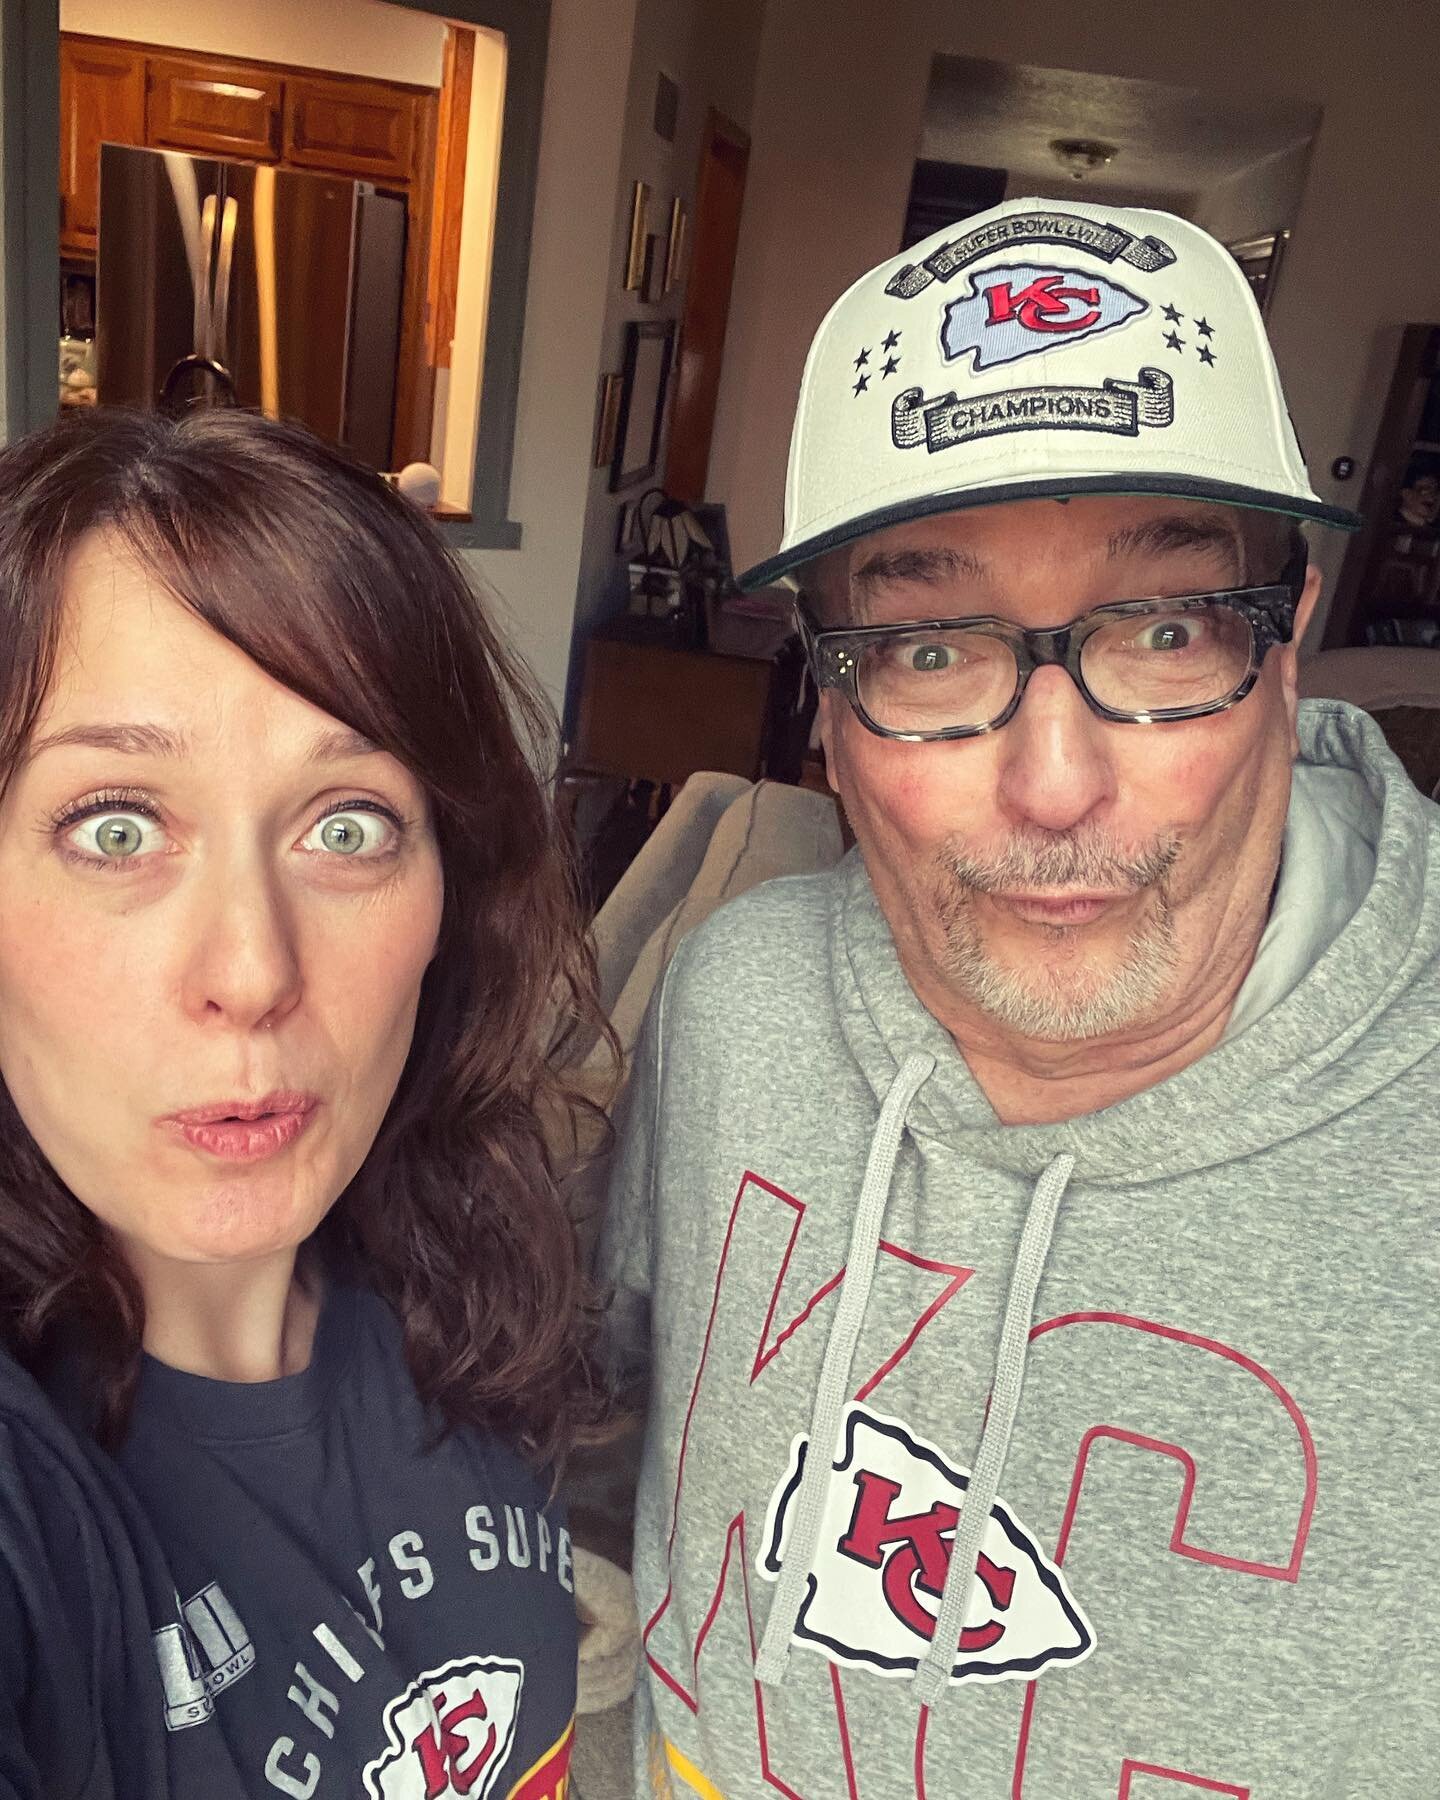 How are our duck faces? Drove down to Kansas City {area where I grew up} to cheer on the Chiefs in the Super Bowl with my mom and dad--Chiefs super fans. Also got my dad some fried chicken to celebrate his 74th bday. Chiefs Kingdom represent! 👑👑🏈?